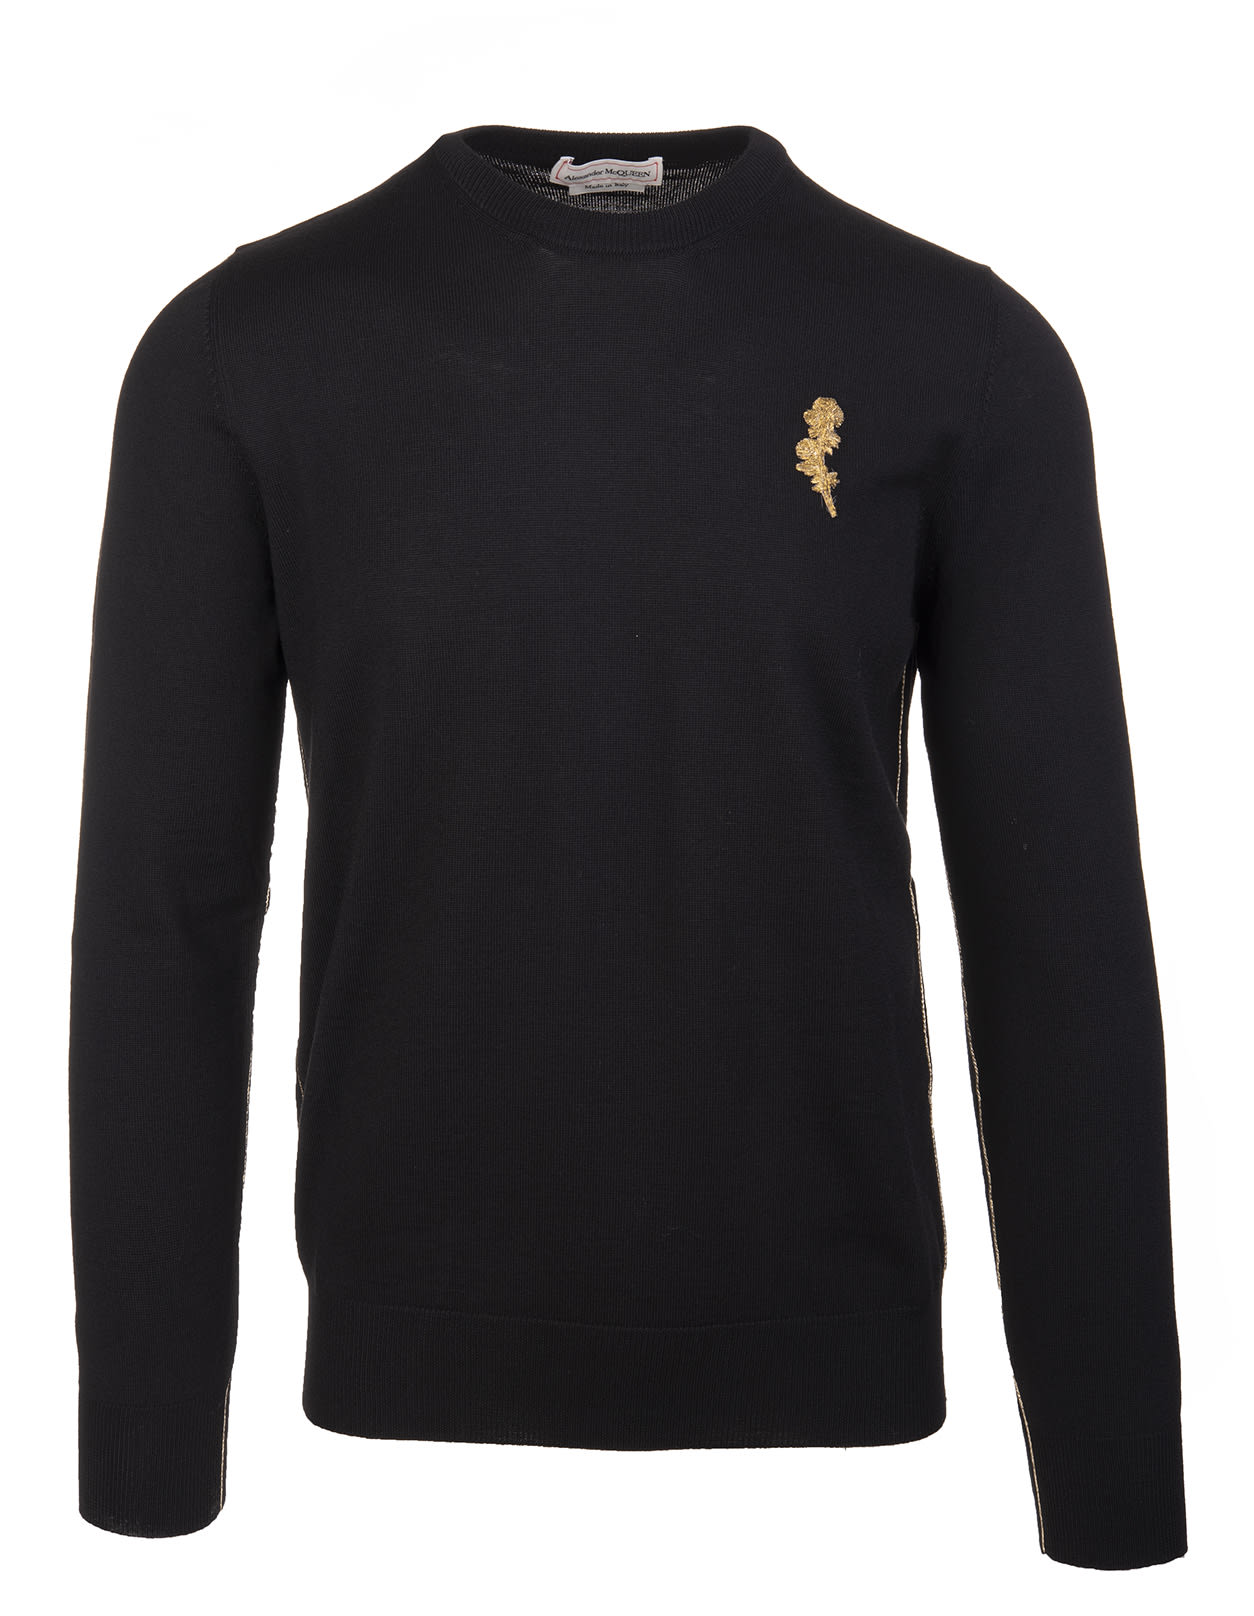 Alexander Mcqueen Man Black Sweater With Gold Thistle Embroidery In Black/gold